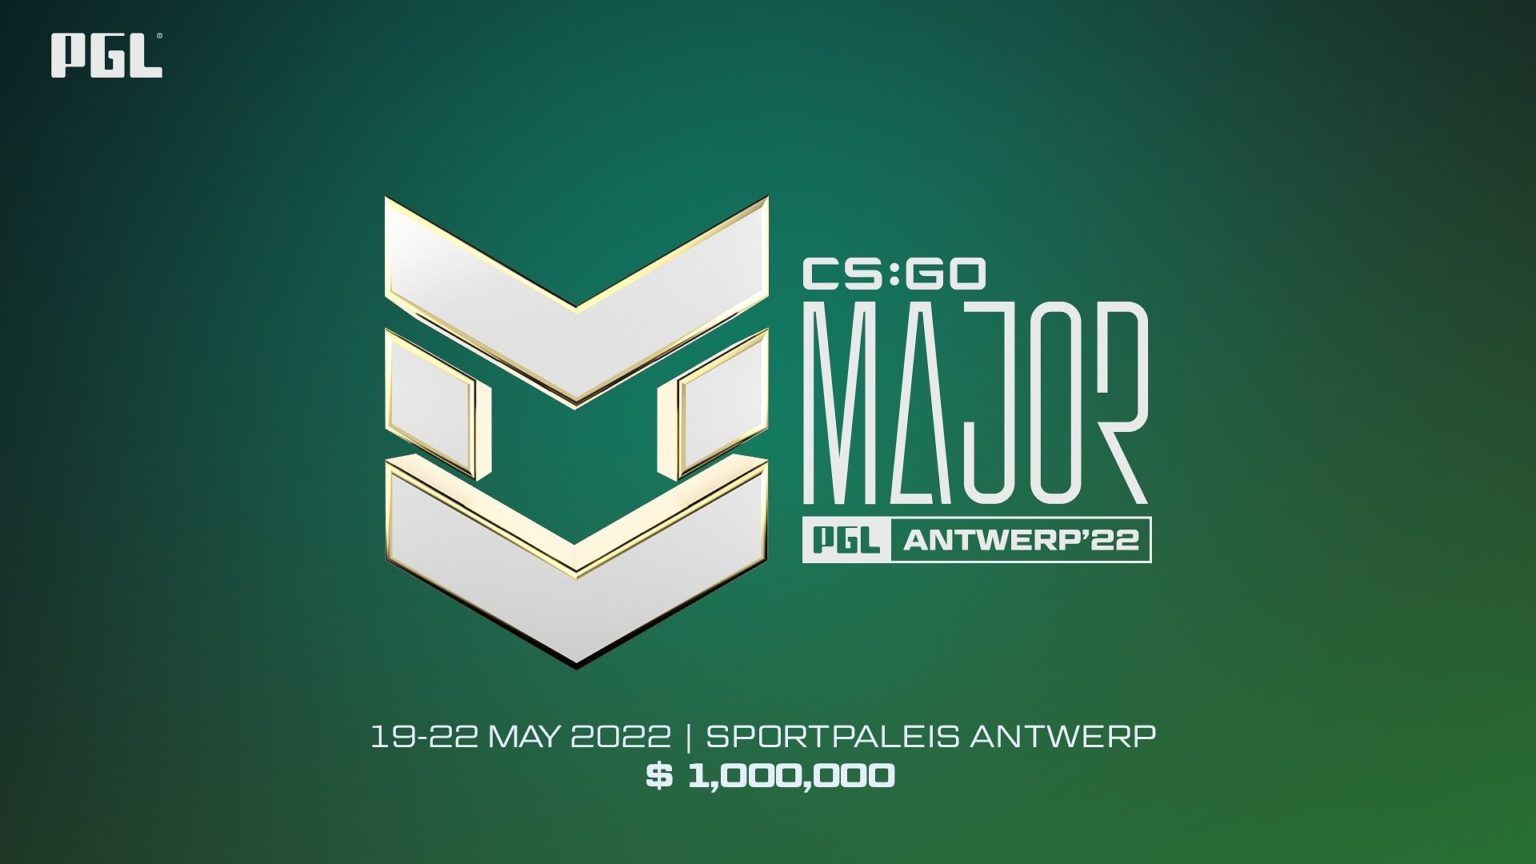 RMR tournaments for pgl major antwerp will take place in april